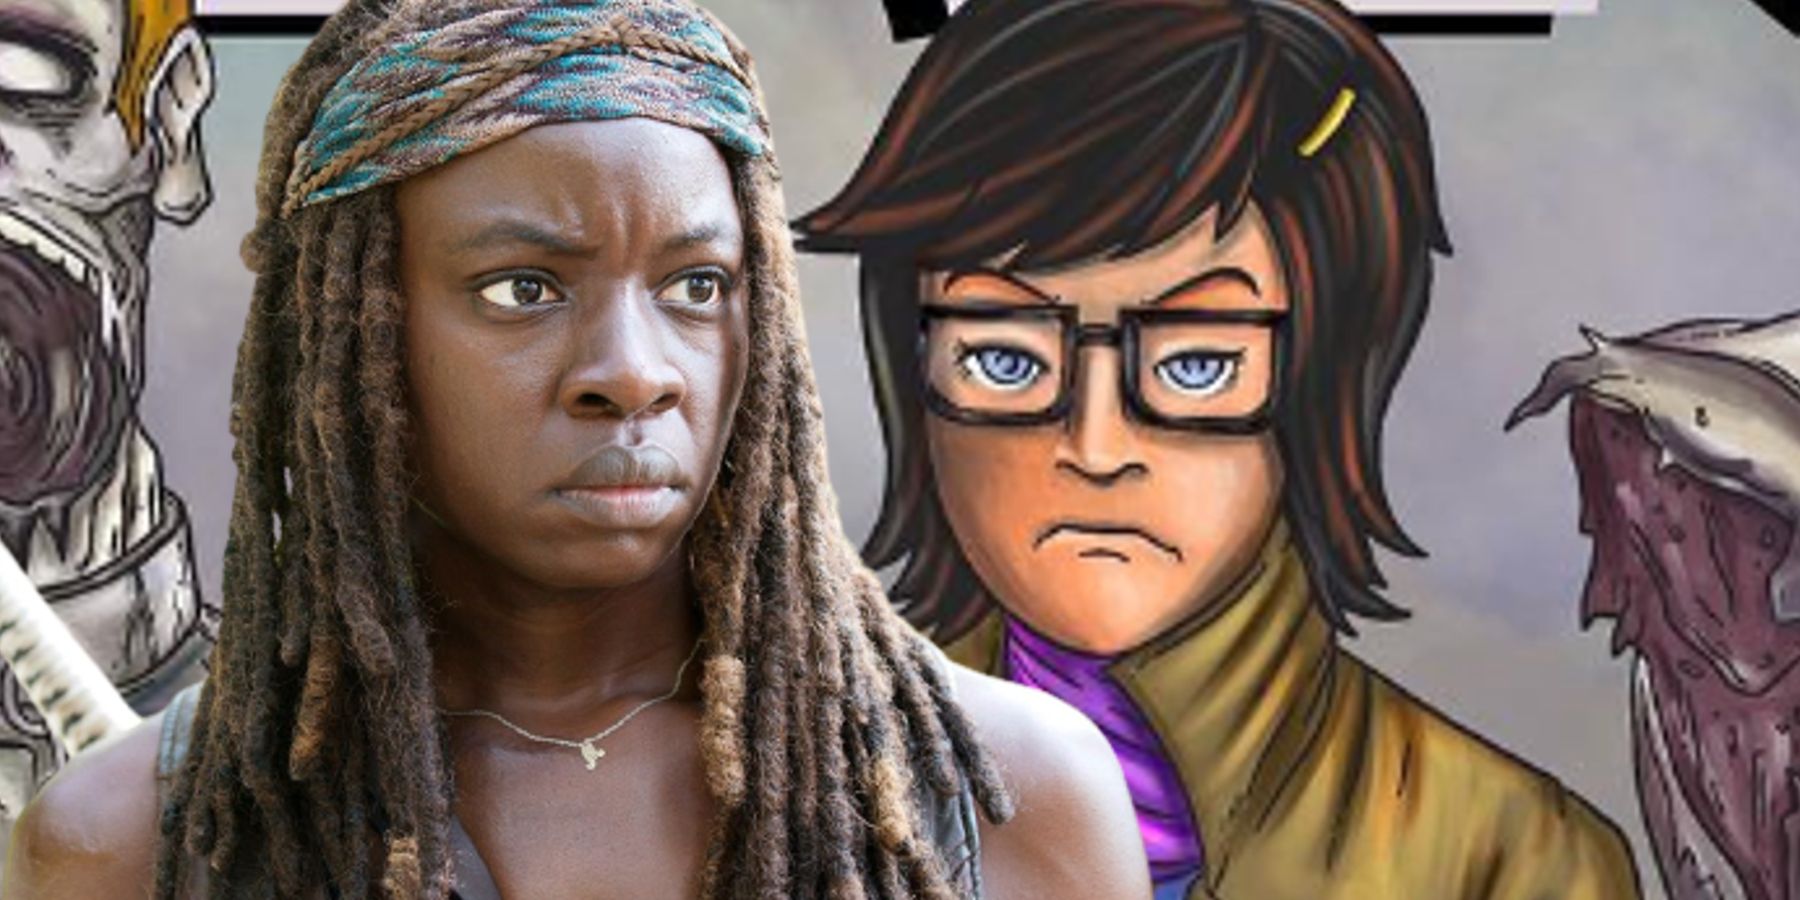 Custom image of Tina in Bob's Burgers fan art next to Michonne from The Walking Dead